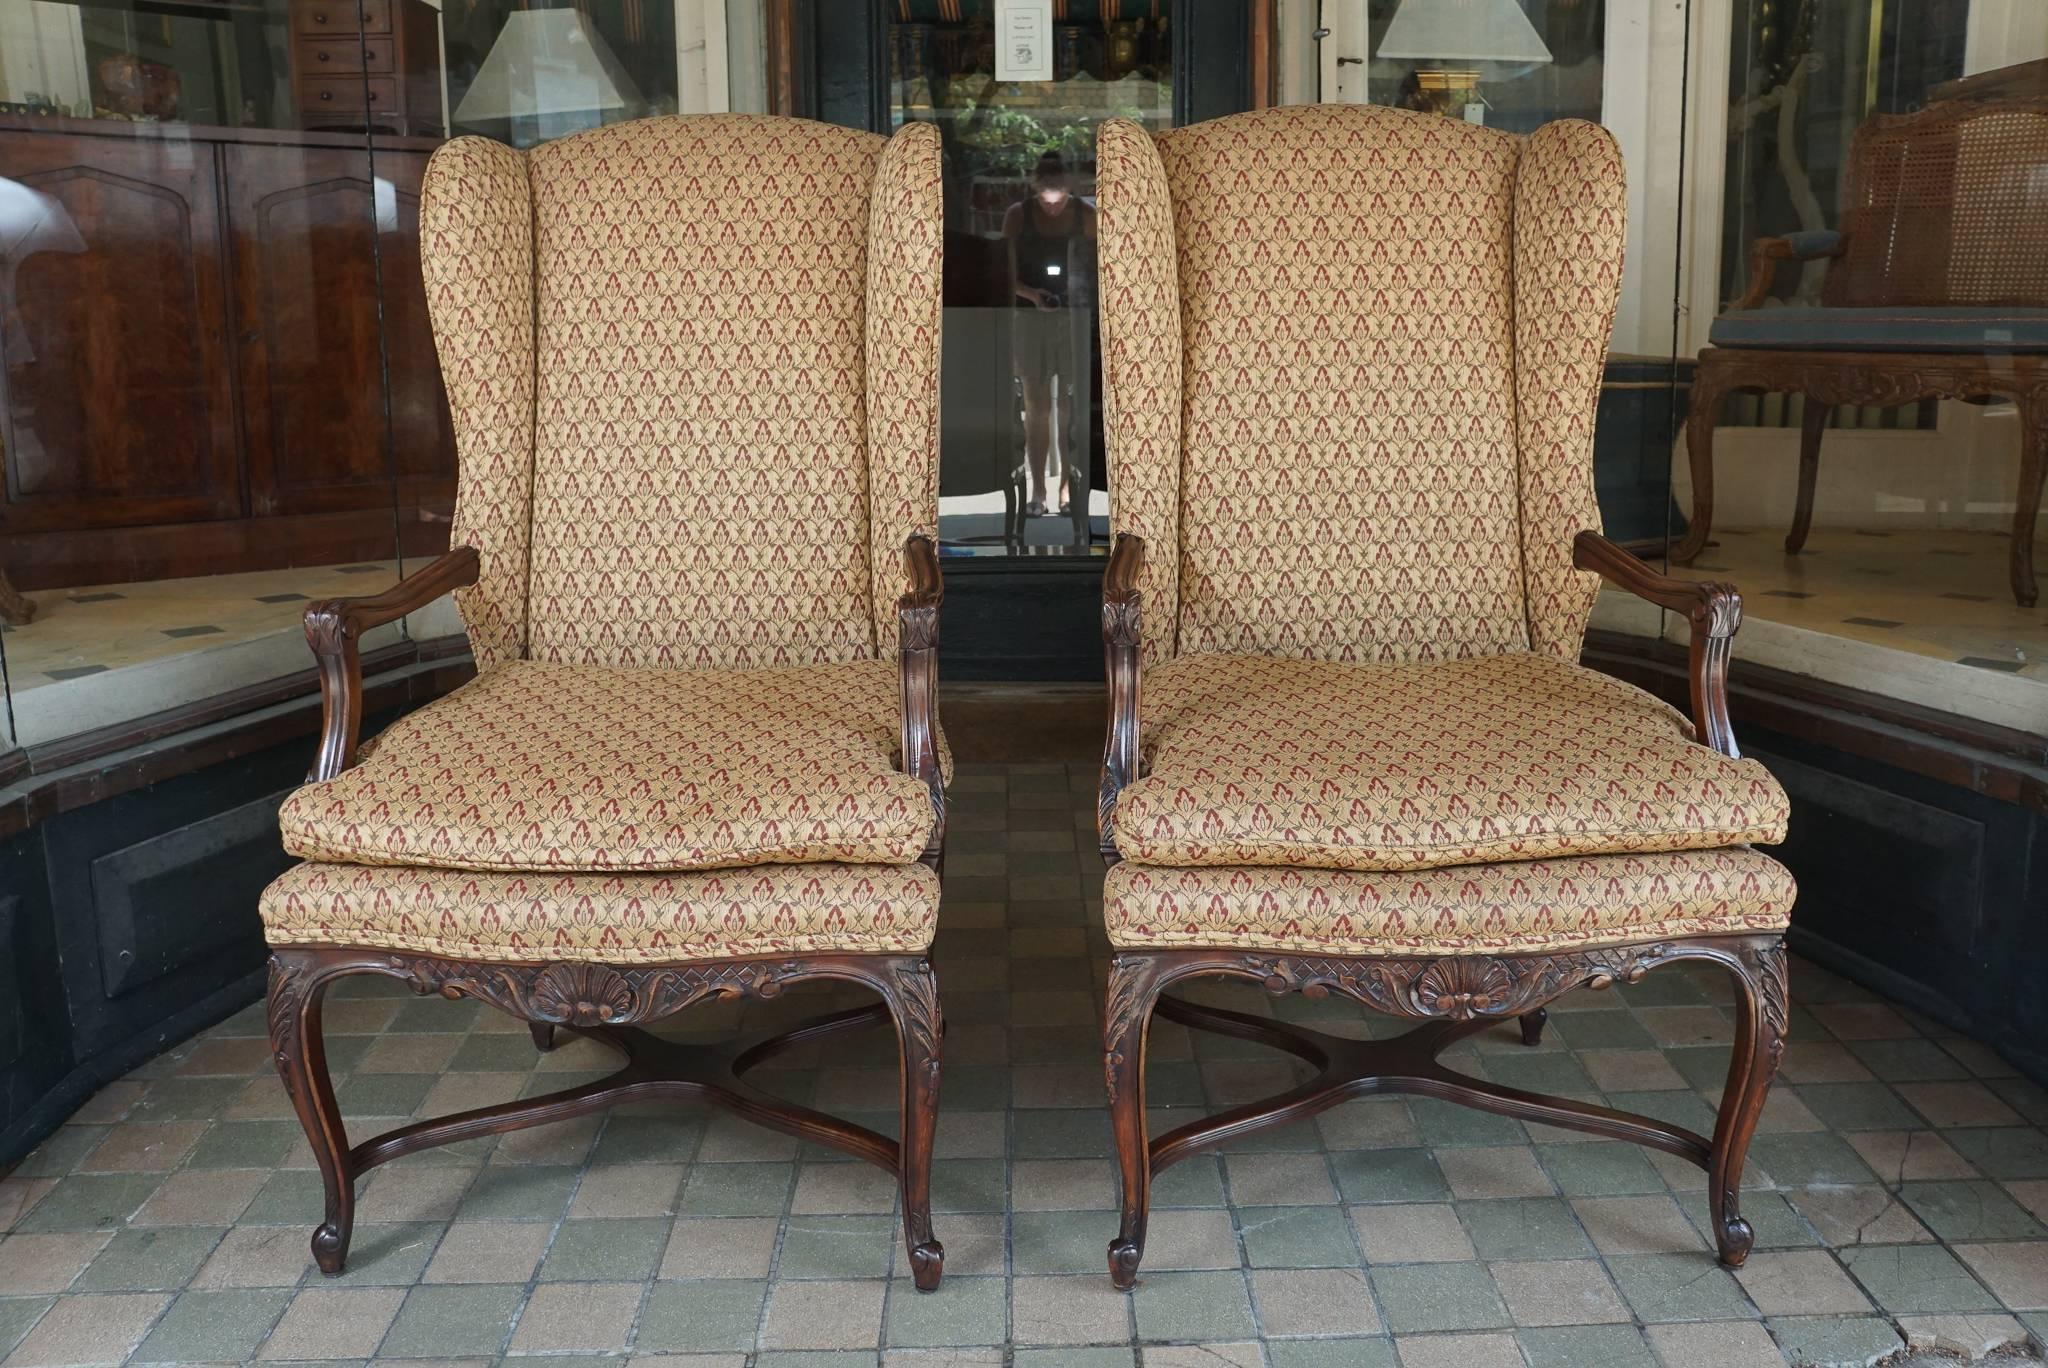 This nice pair of wing chairs are comfortable and solid. Crafted in the late 1950s most likely in France the pair is made from walnut and are well carved compared to most furniture produced in antique styles from the period. Made in the Louis XV